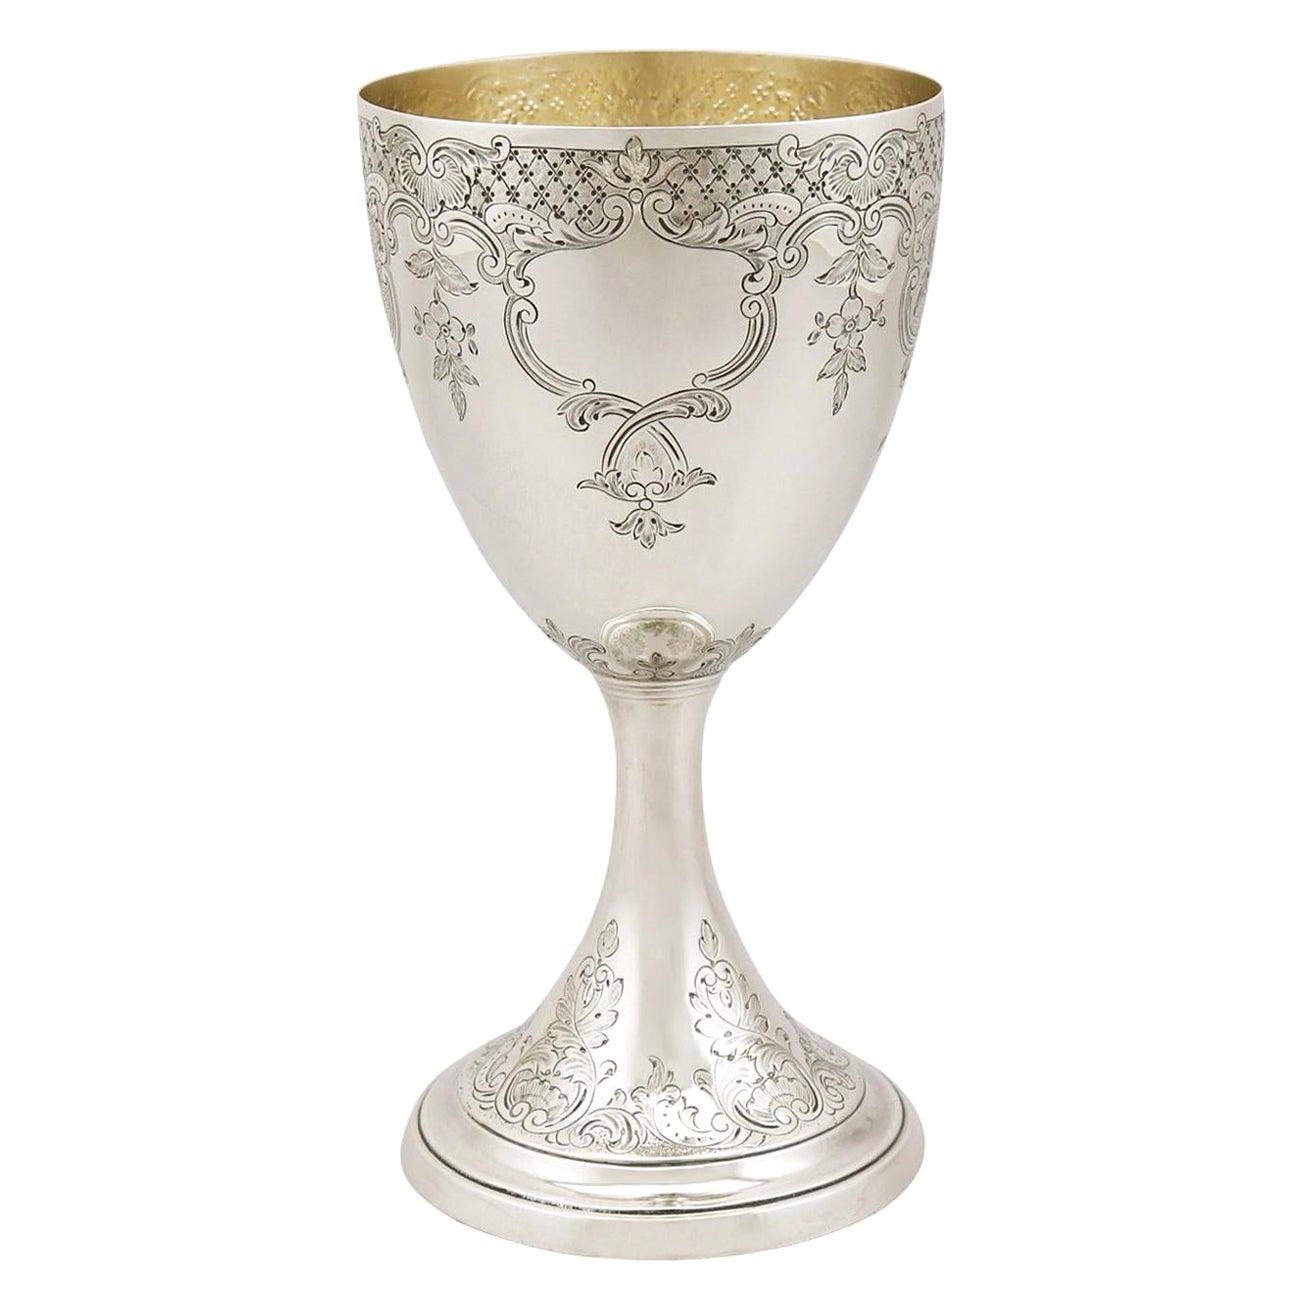 Antique English Sterling Silver Goblet by Thomas Watson & Co.